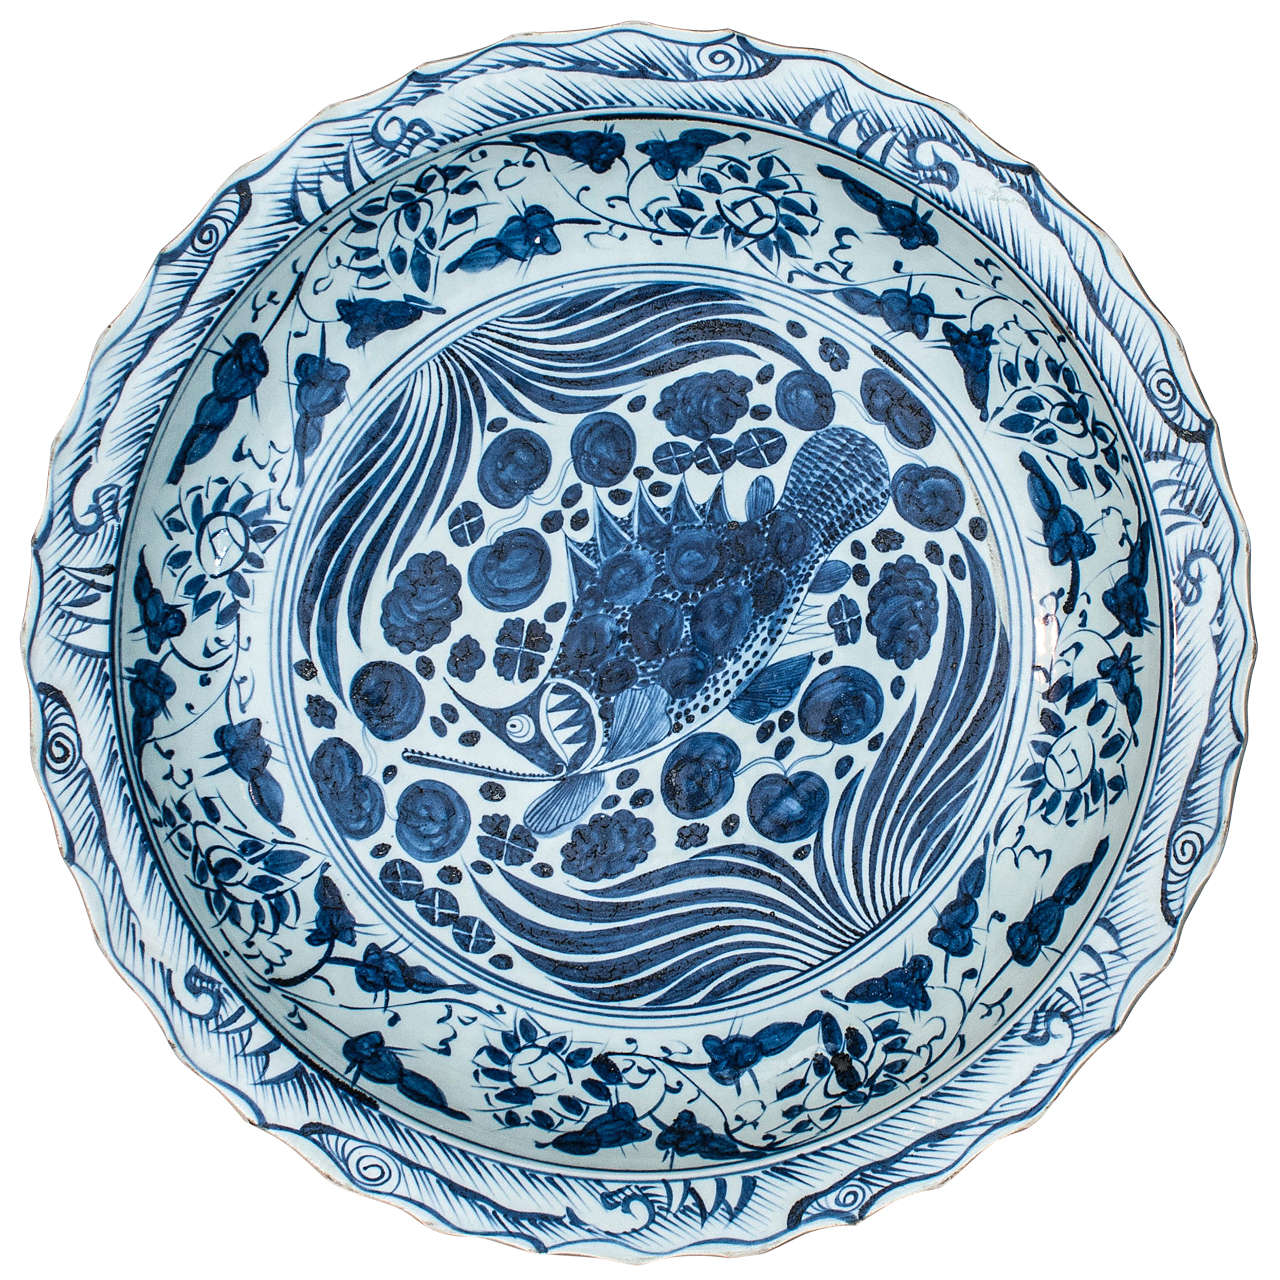 Monumental Blue and White Chinese Porcelain Charger